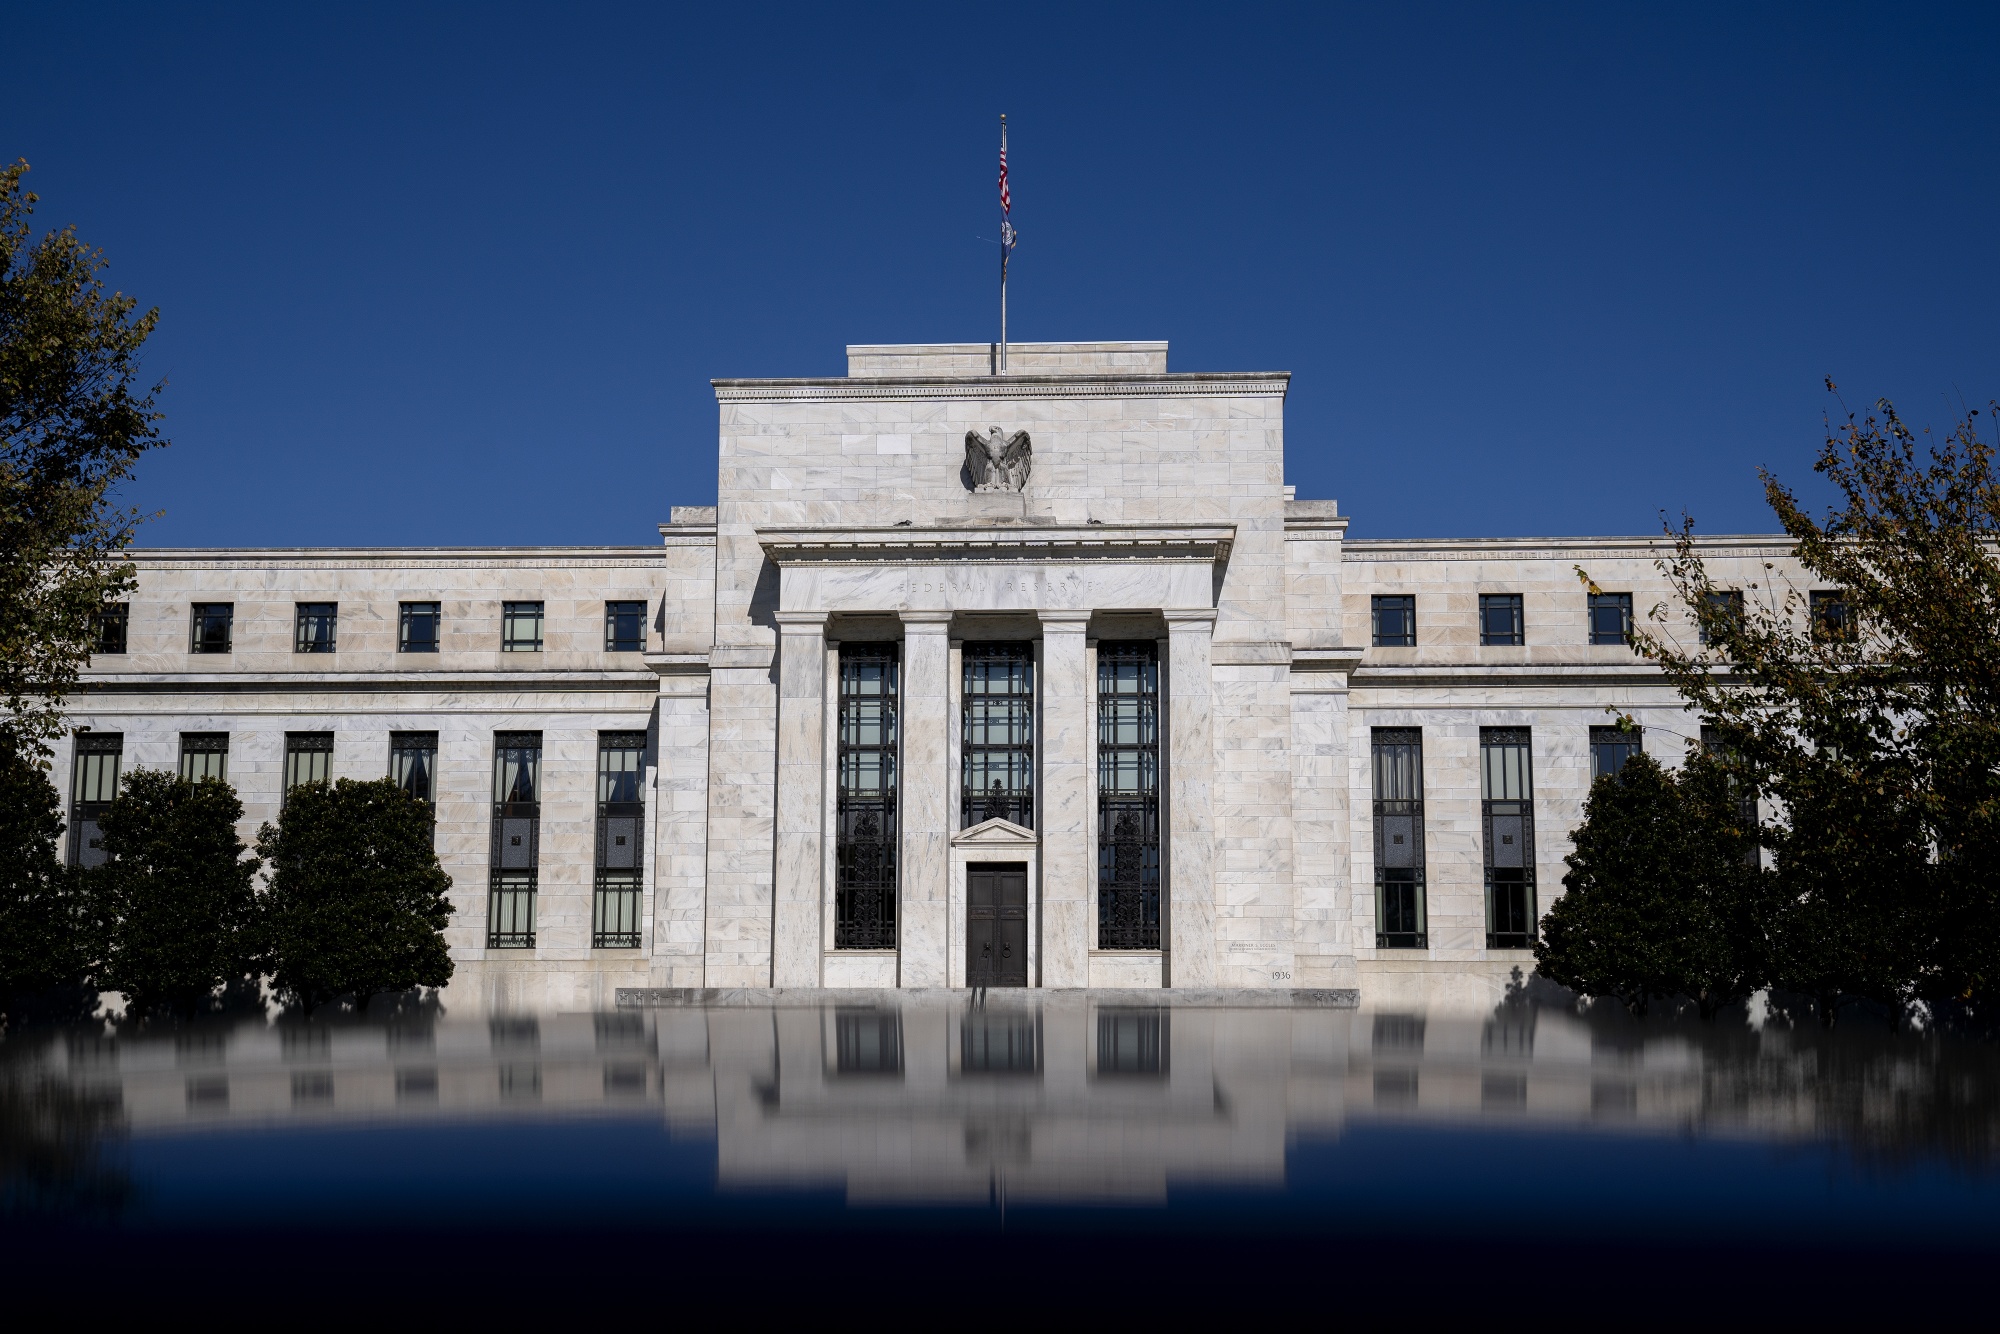 The U.S. Federal Reserve building in Washington